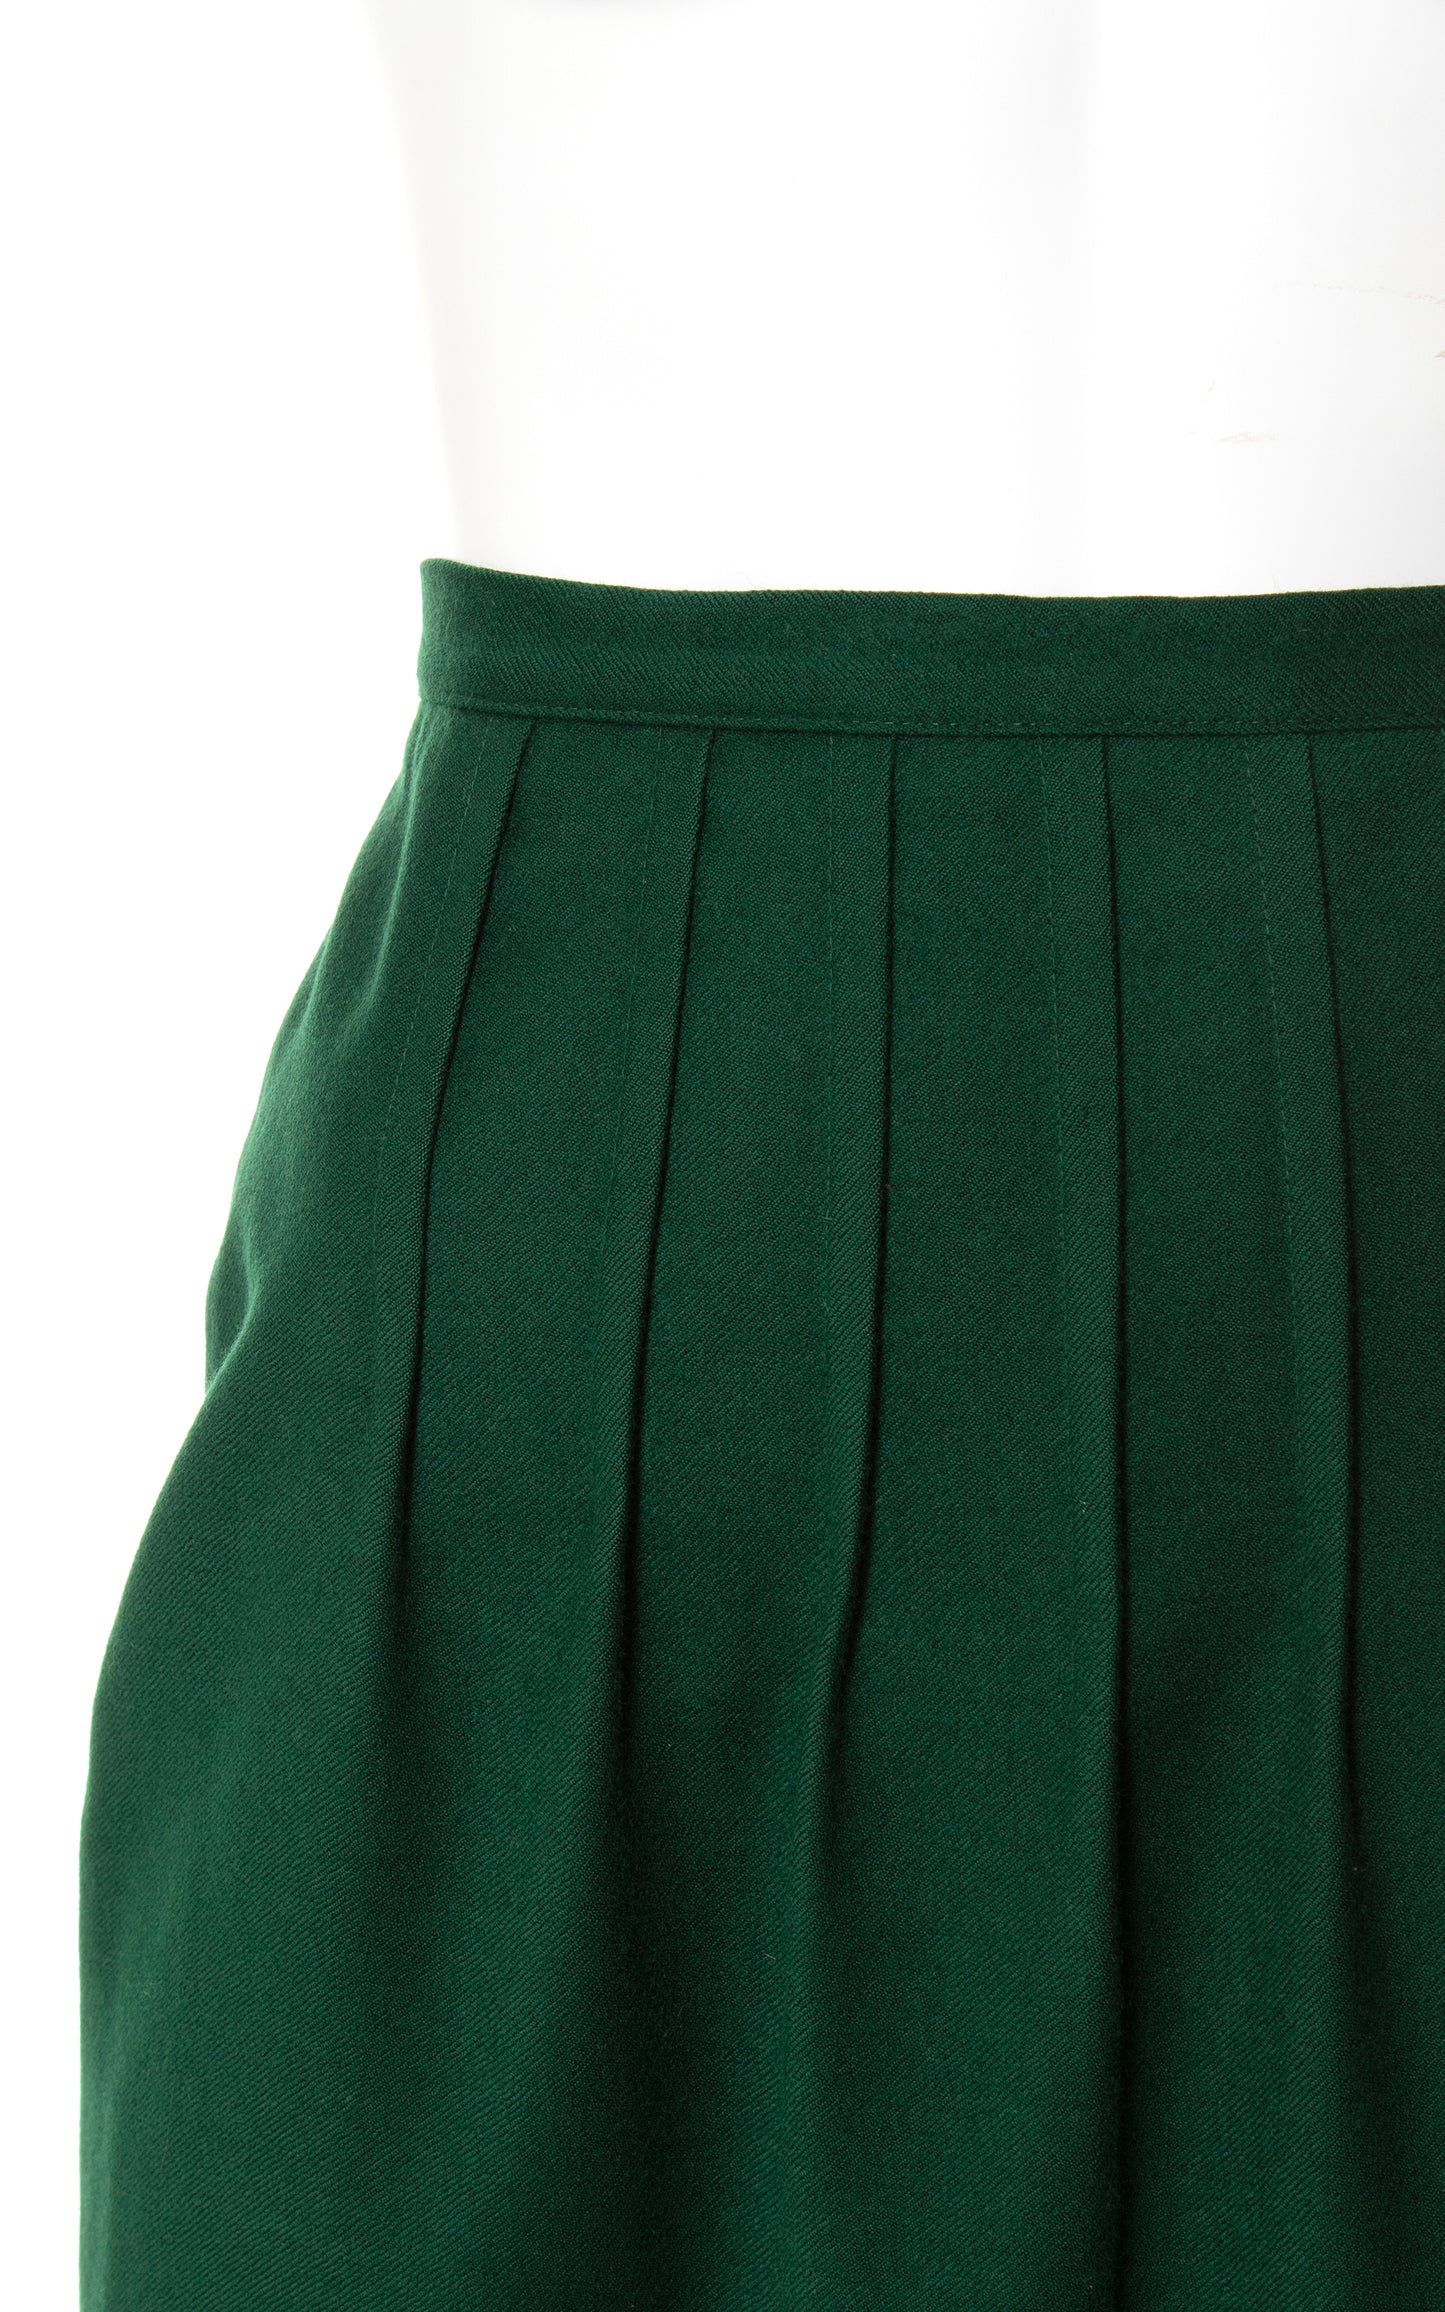 1980s GIORGIO ARMANI Forest Green Wool Pencil Skirt | small